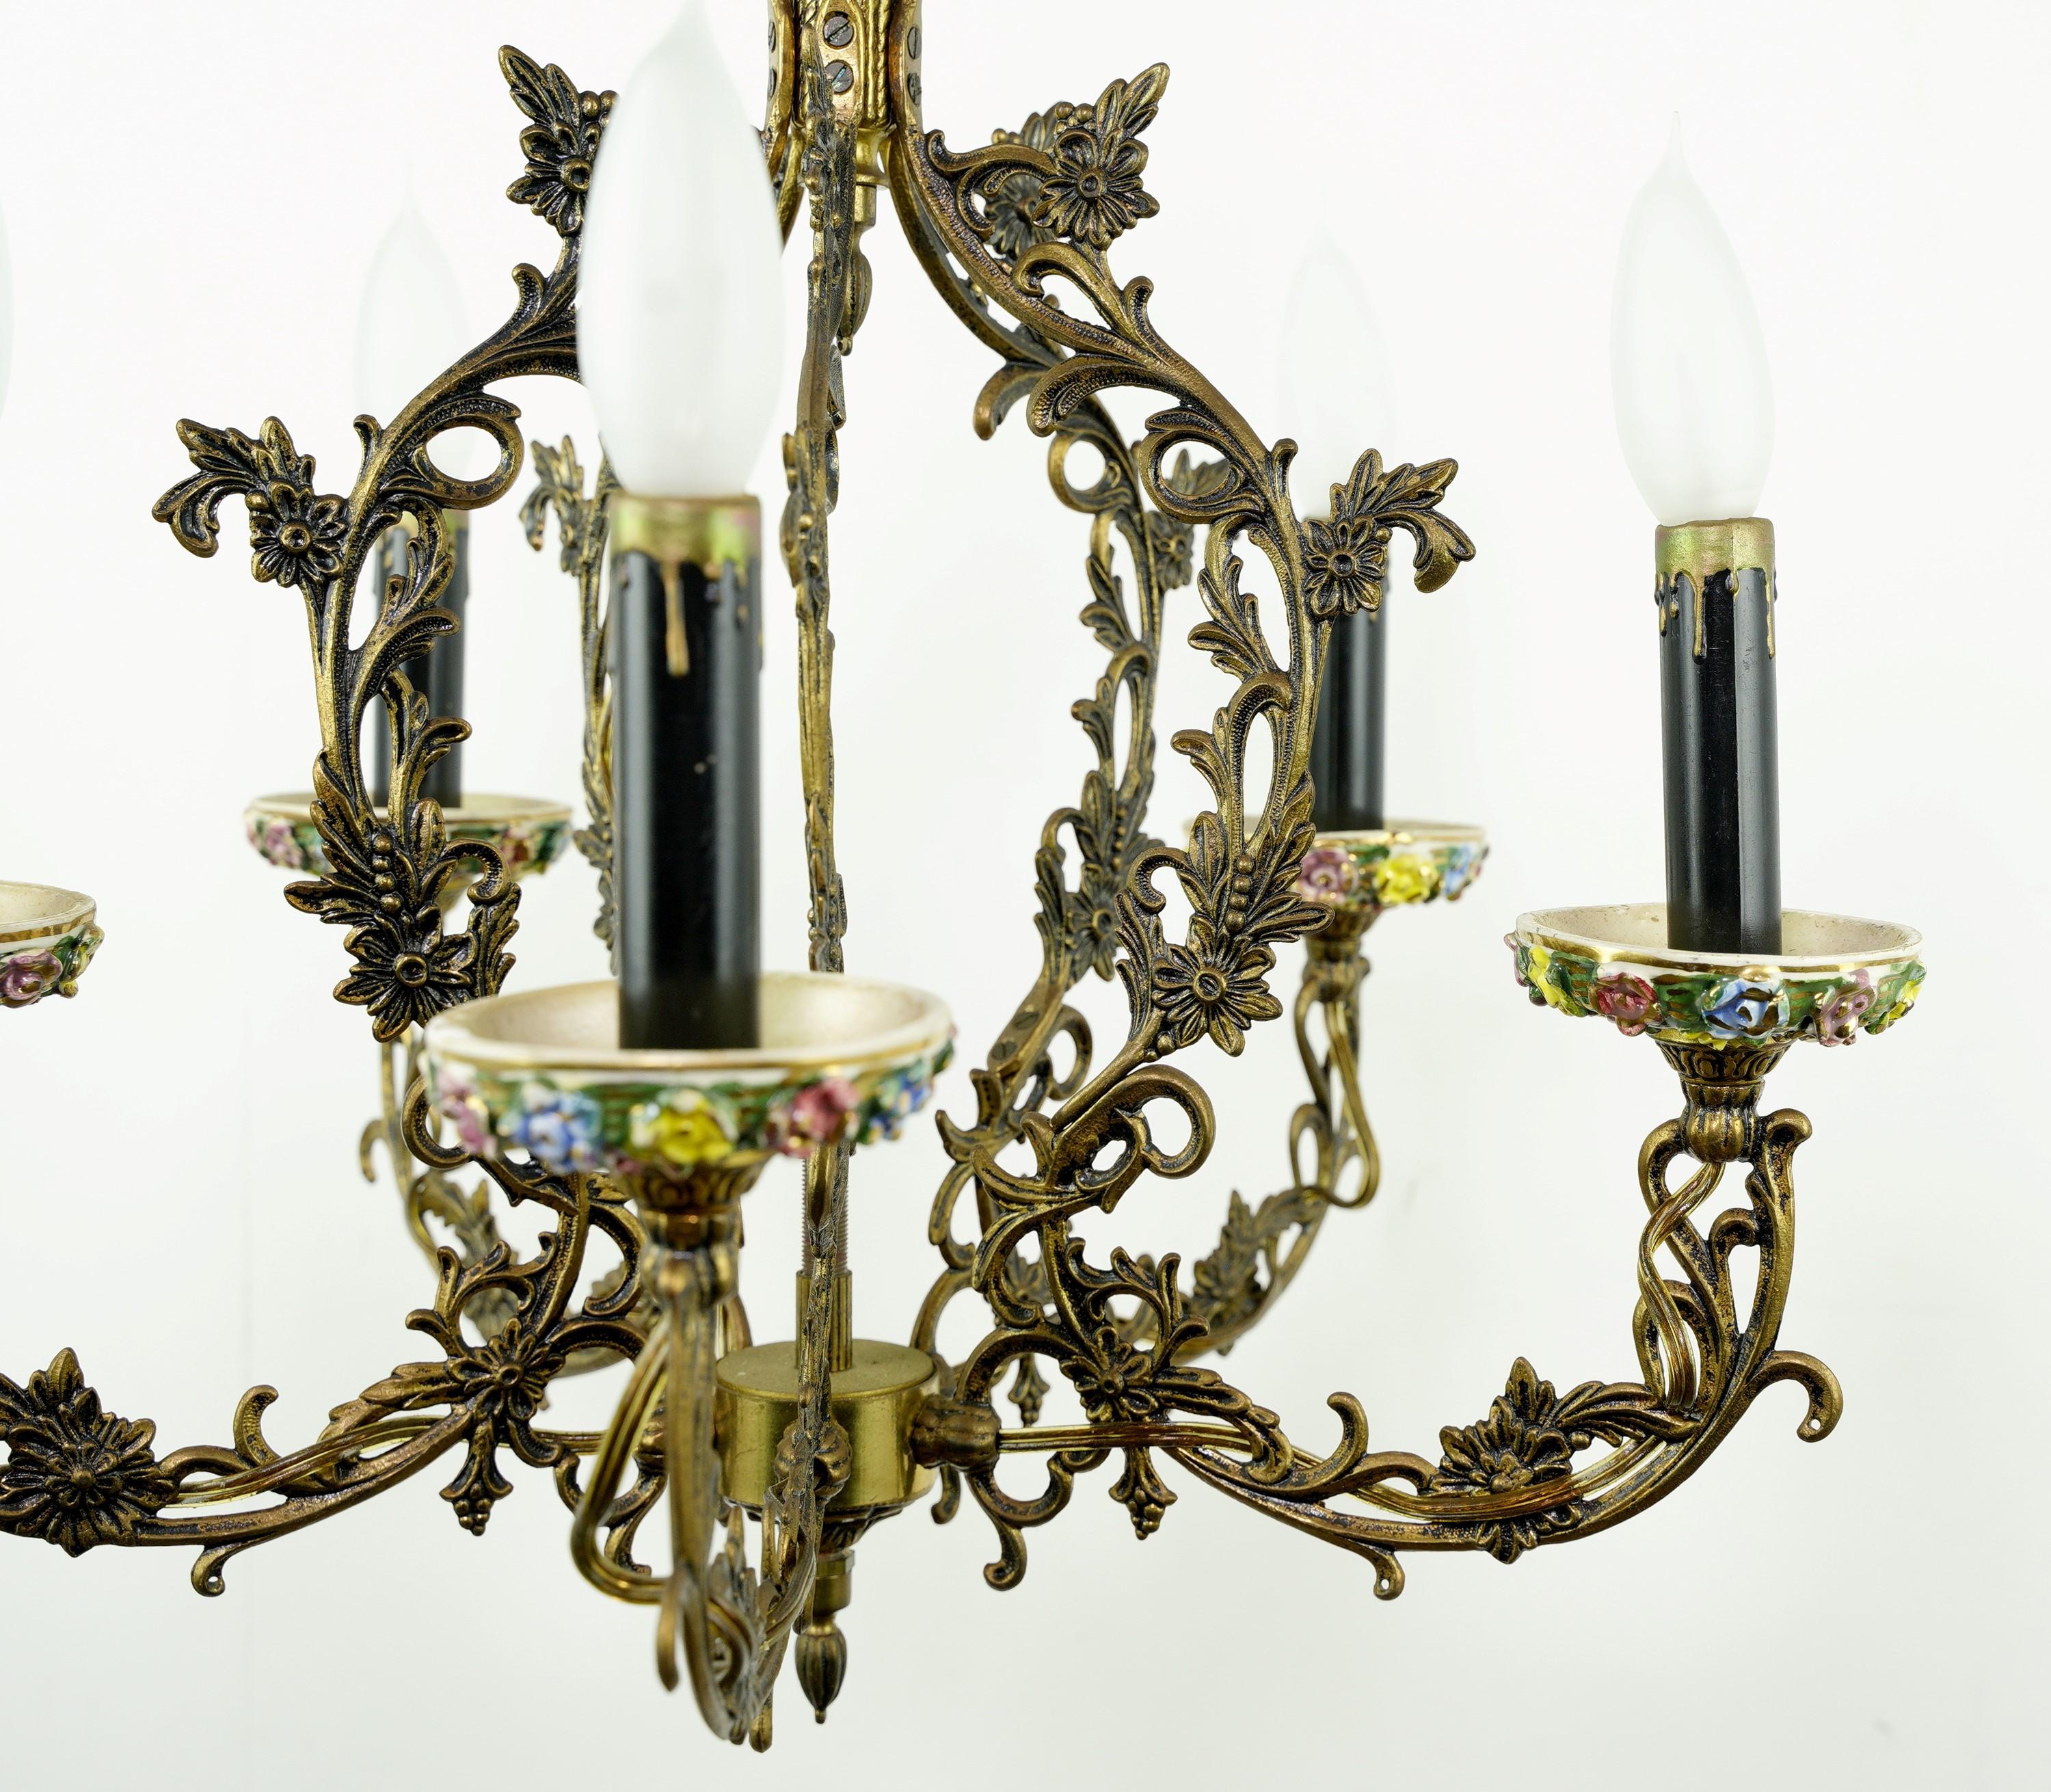 Rococo style five light chandelier featuring a floral design. Hand painted pink, blue, and yellow colored flowers on the bobeches. Takes 5 standard candelabra light bulbs. Cleaned and restored. Please note, this item is located in our Scranton, PA